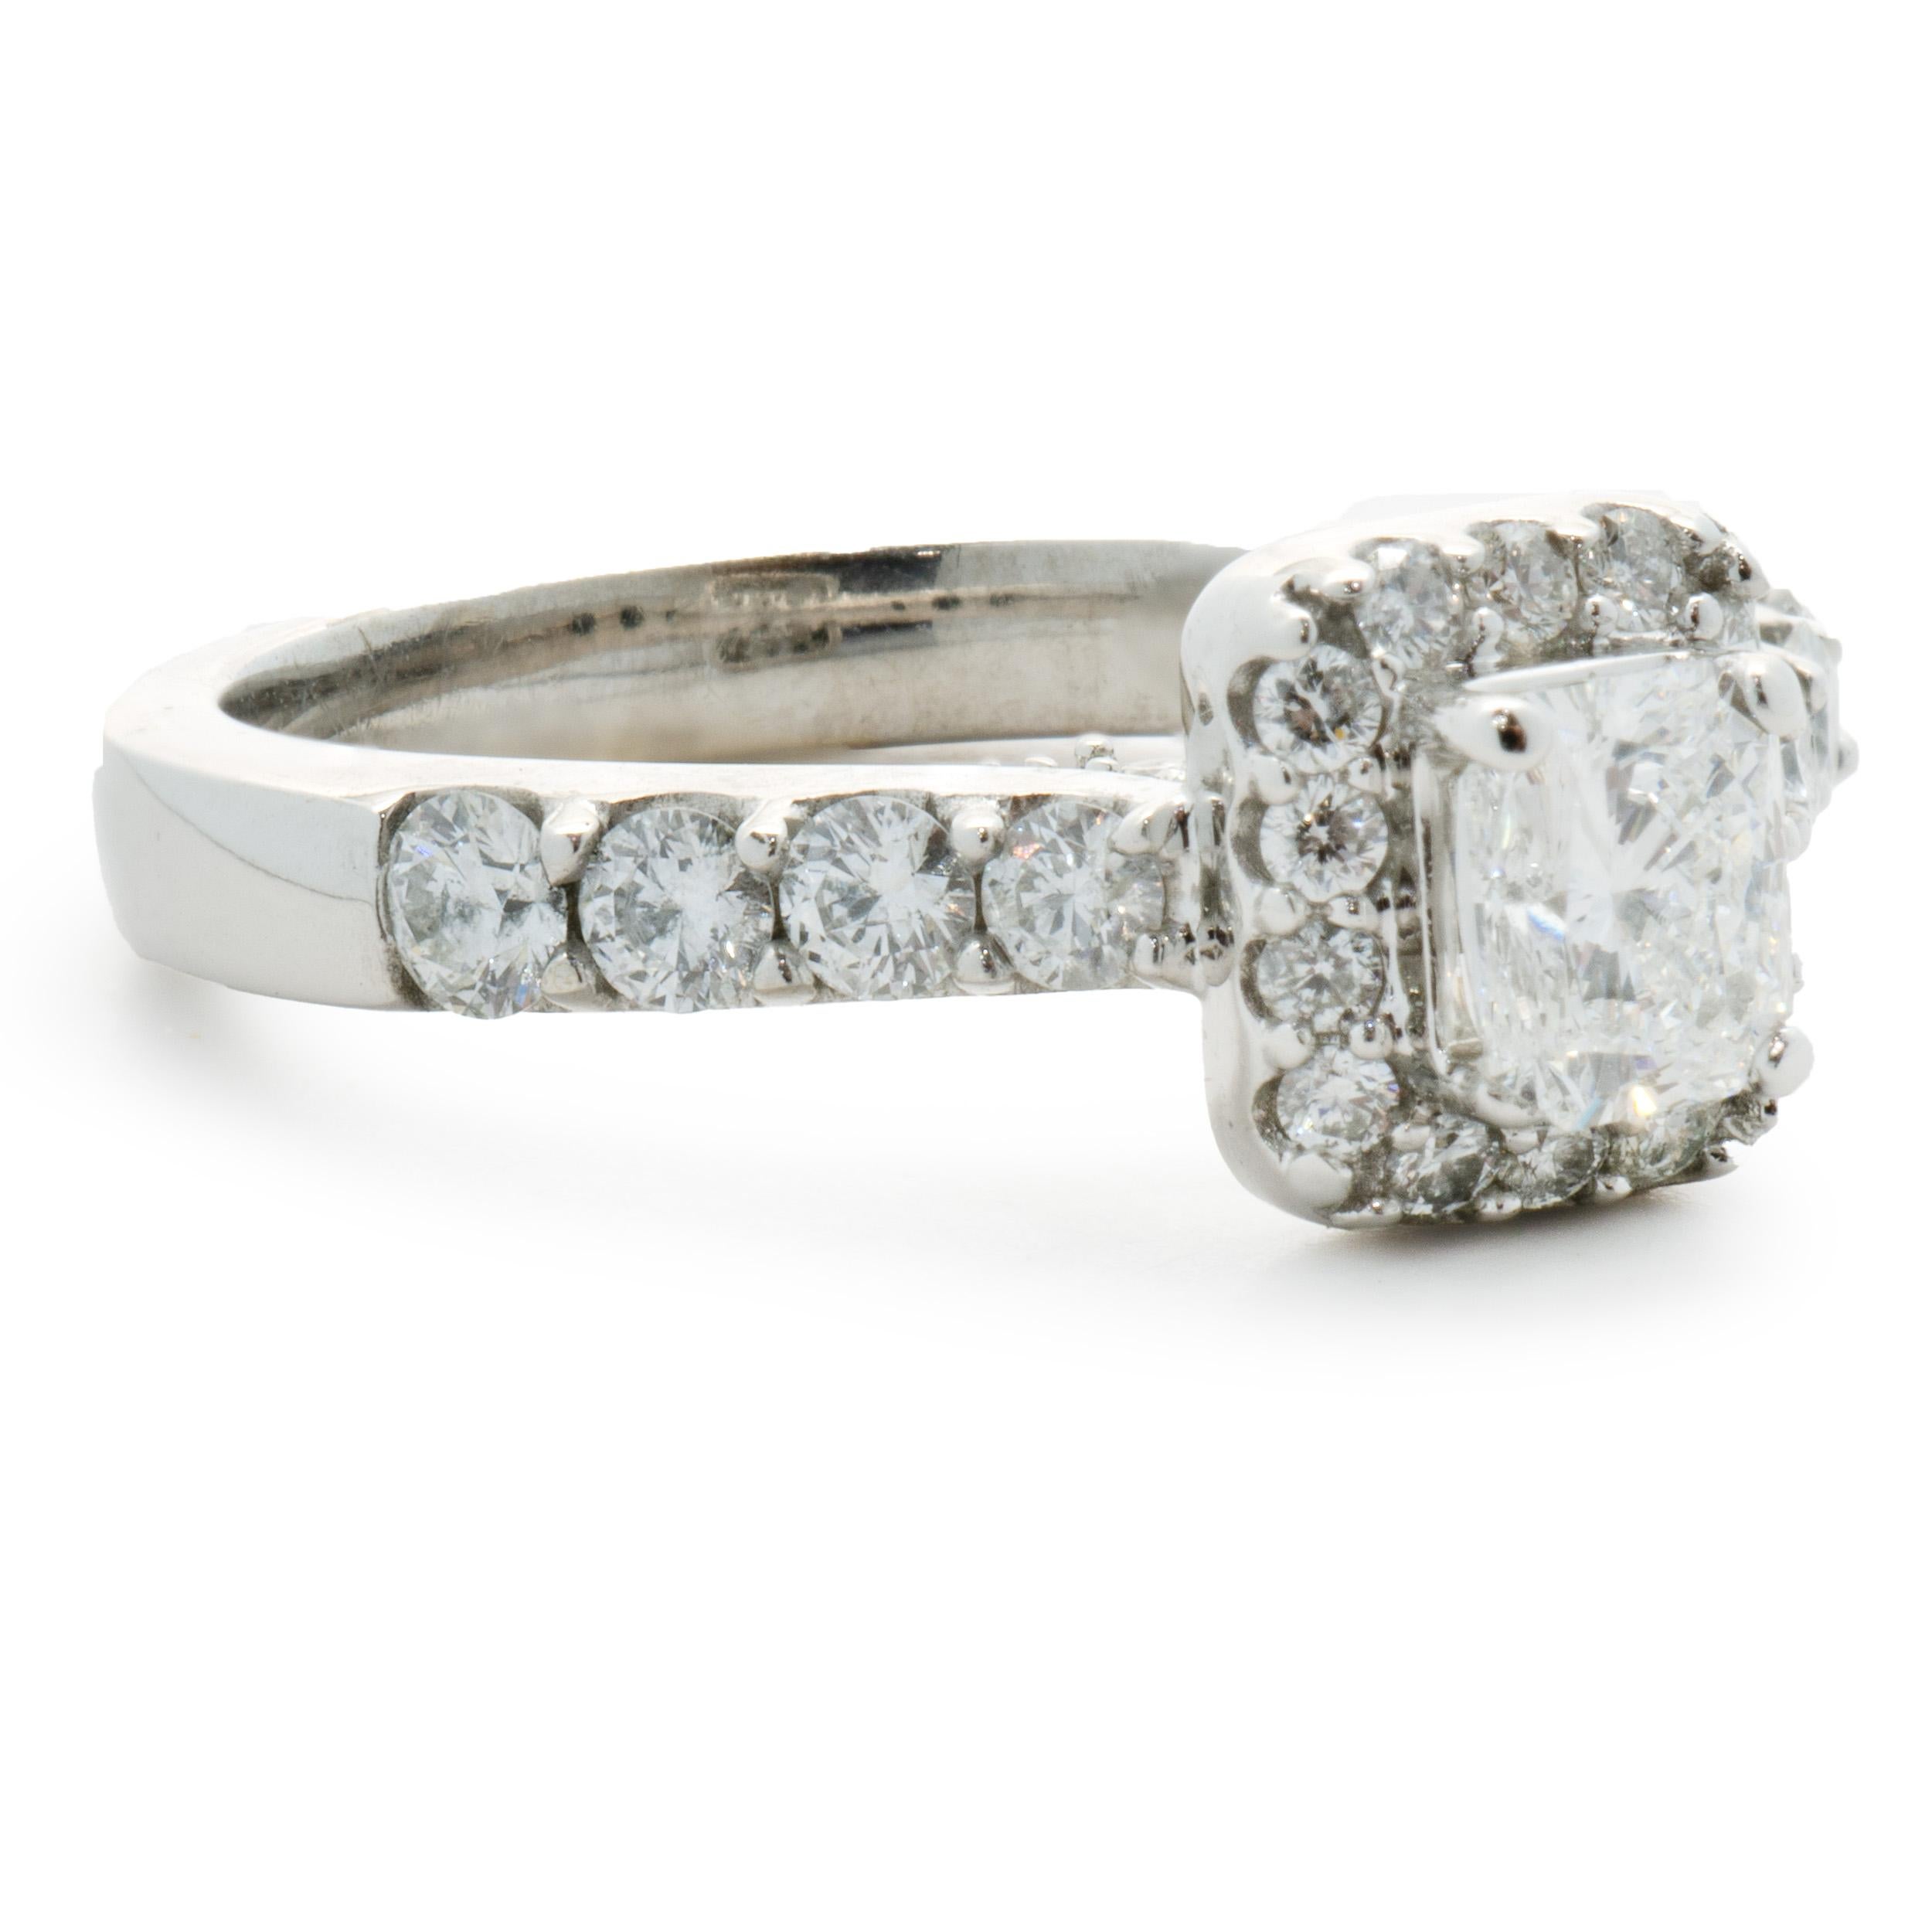 Designer: Custom
Material: 14K white gold
Diamond: 1 radiant cut = 0.55ct
Color: H
Clarity SI2
Diamond: 30 round brilliant cut = 1.00cttw
Color: H
Clarity: SI1-2
Dimensions: ring top measures 8.5mm wide
Ring Size: 7 (complimentary sizing